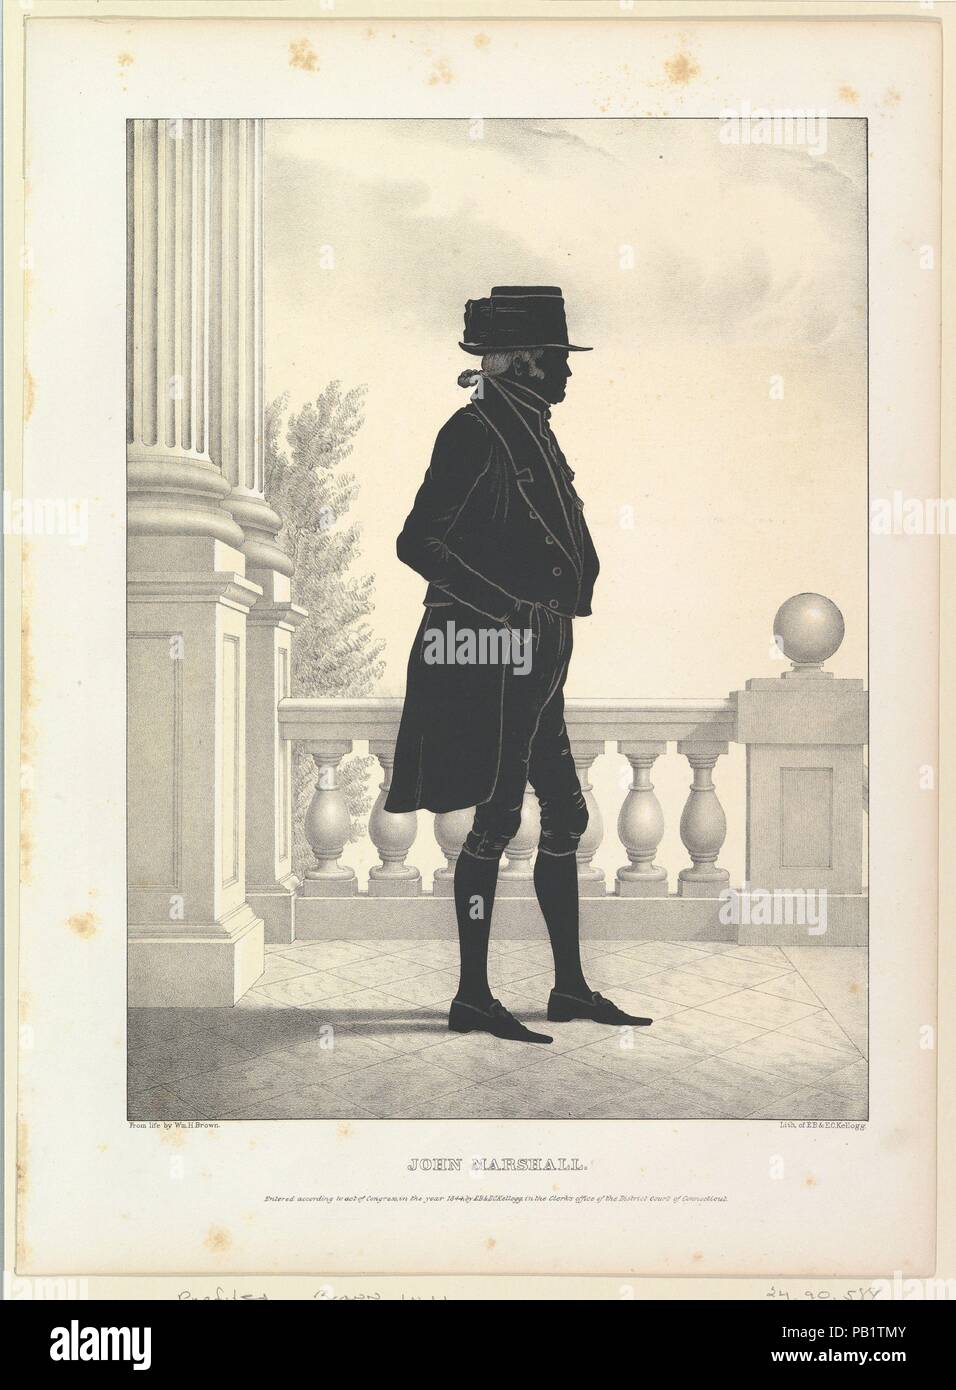 Silhouette Portrait of John Marshall. Artist: William Henry Brown (American, Charleston, South Carolina 1808-1883 Charleston, South Carolina). Dimensions: image: 13 1/2 x 9 15/16 in. (34.3 x 25.3 cm)  sheet: 16 7/8 x 12 3/8 in. (42.8 x 31.4 cm). Lithographer: Lithographed and published by E. B. & E. C. Kellogg (American, active Hartford, Connecticut 1840-67). Sitter: John Marshall (American, 1755-1835). Date: 1844. Museum: Metropolitan Museum of Art, New York, USA. Stock Photo